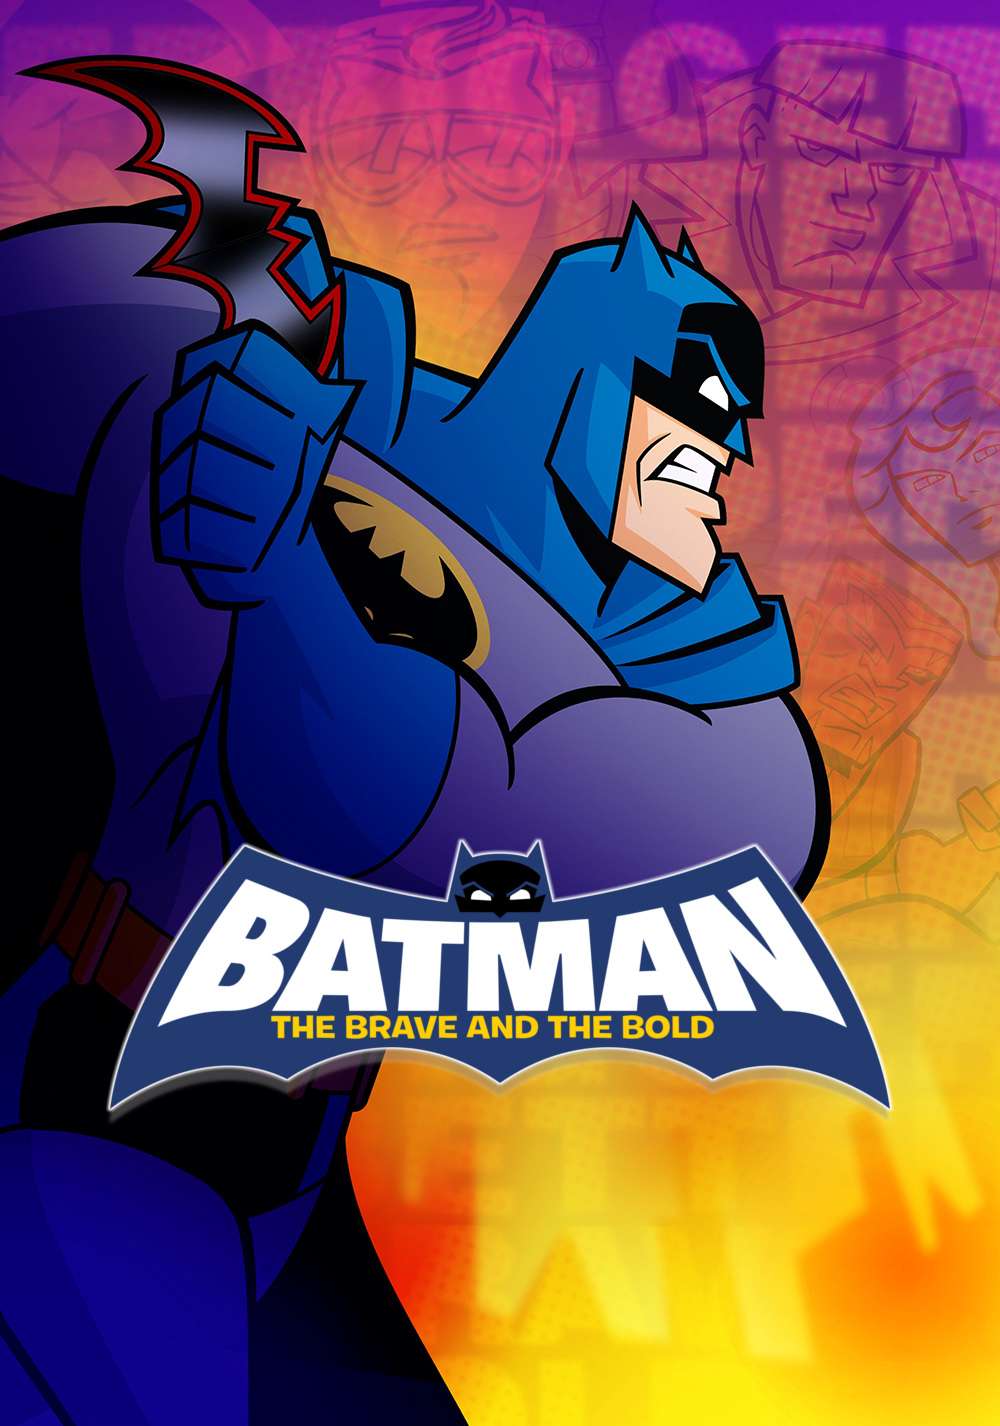 Batman The Brave and the Bold (2008)